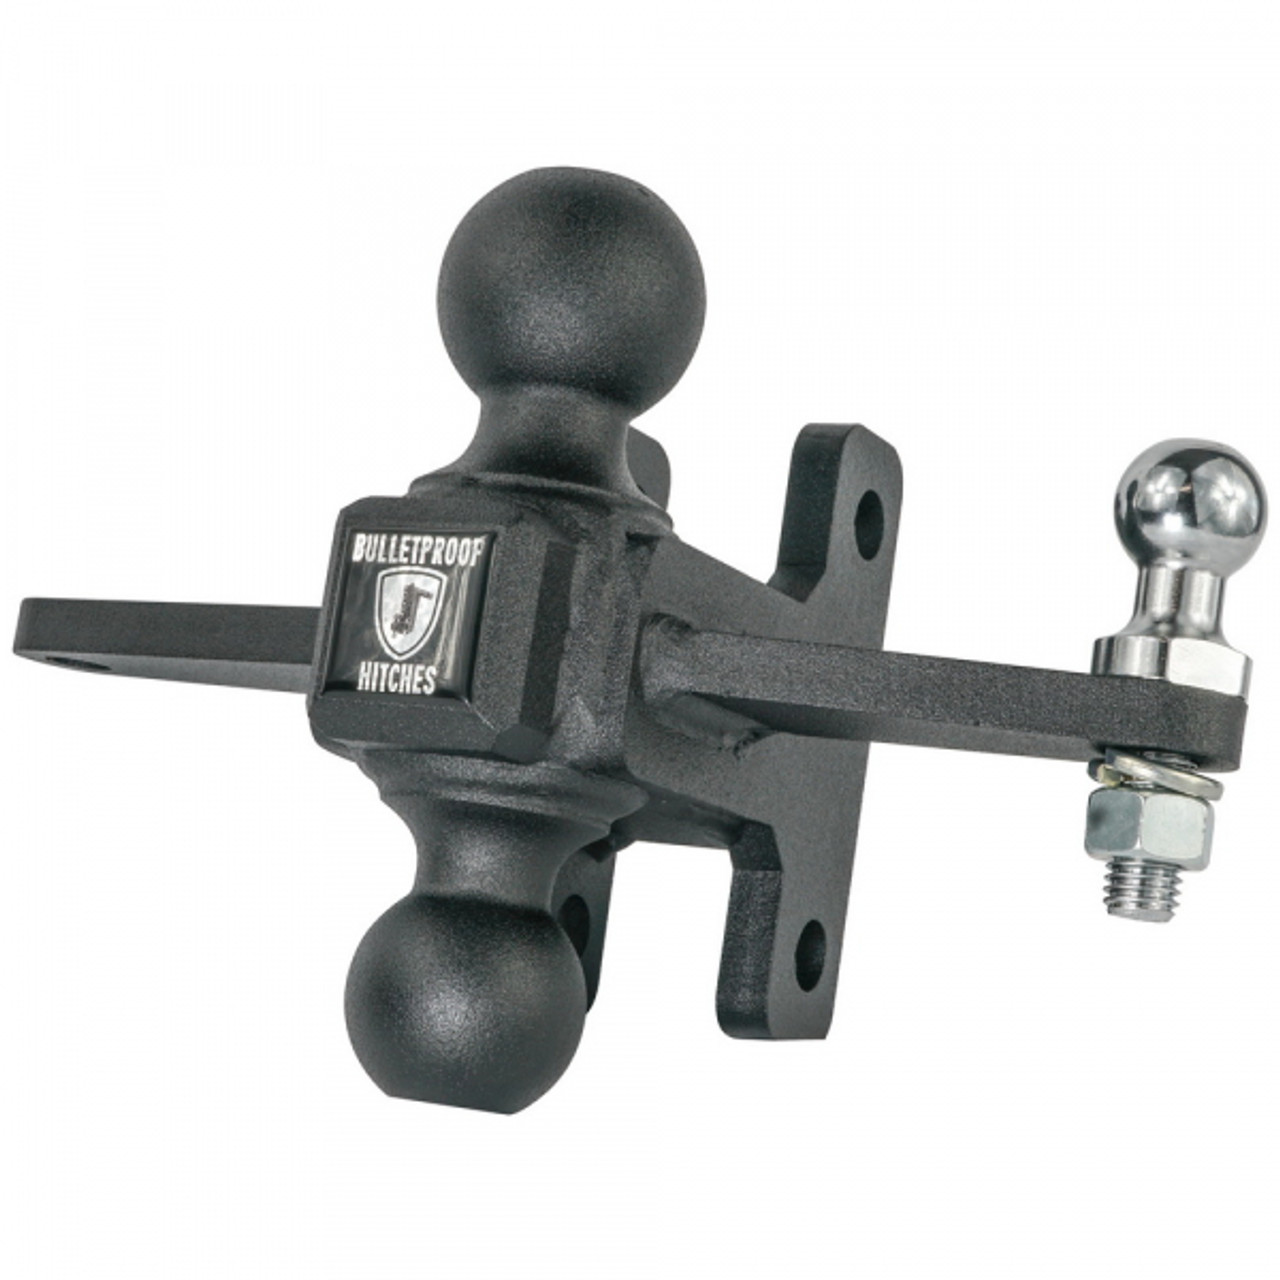 BULLETPROOF HITCHES EXTREME DUTY SWAY CONTROL BALL MOUNT-Main View